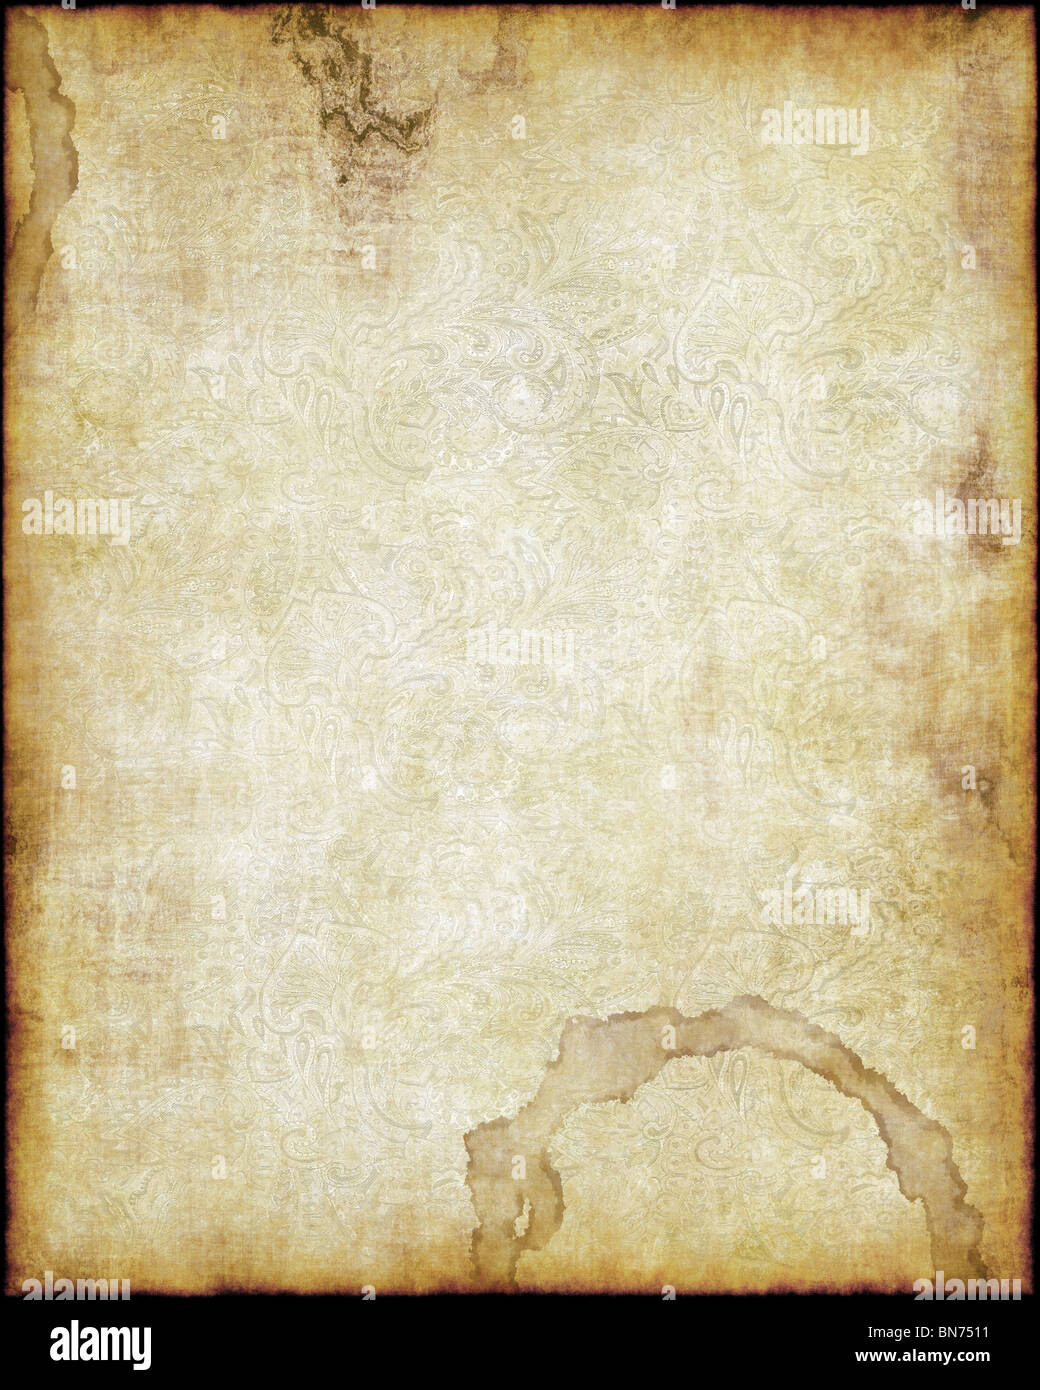 old worn parchment paper background texture image Stock Photo